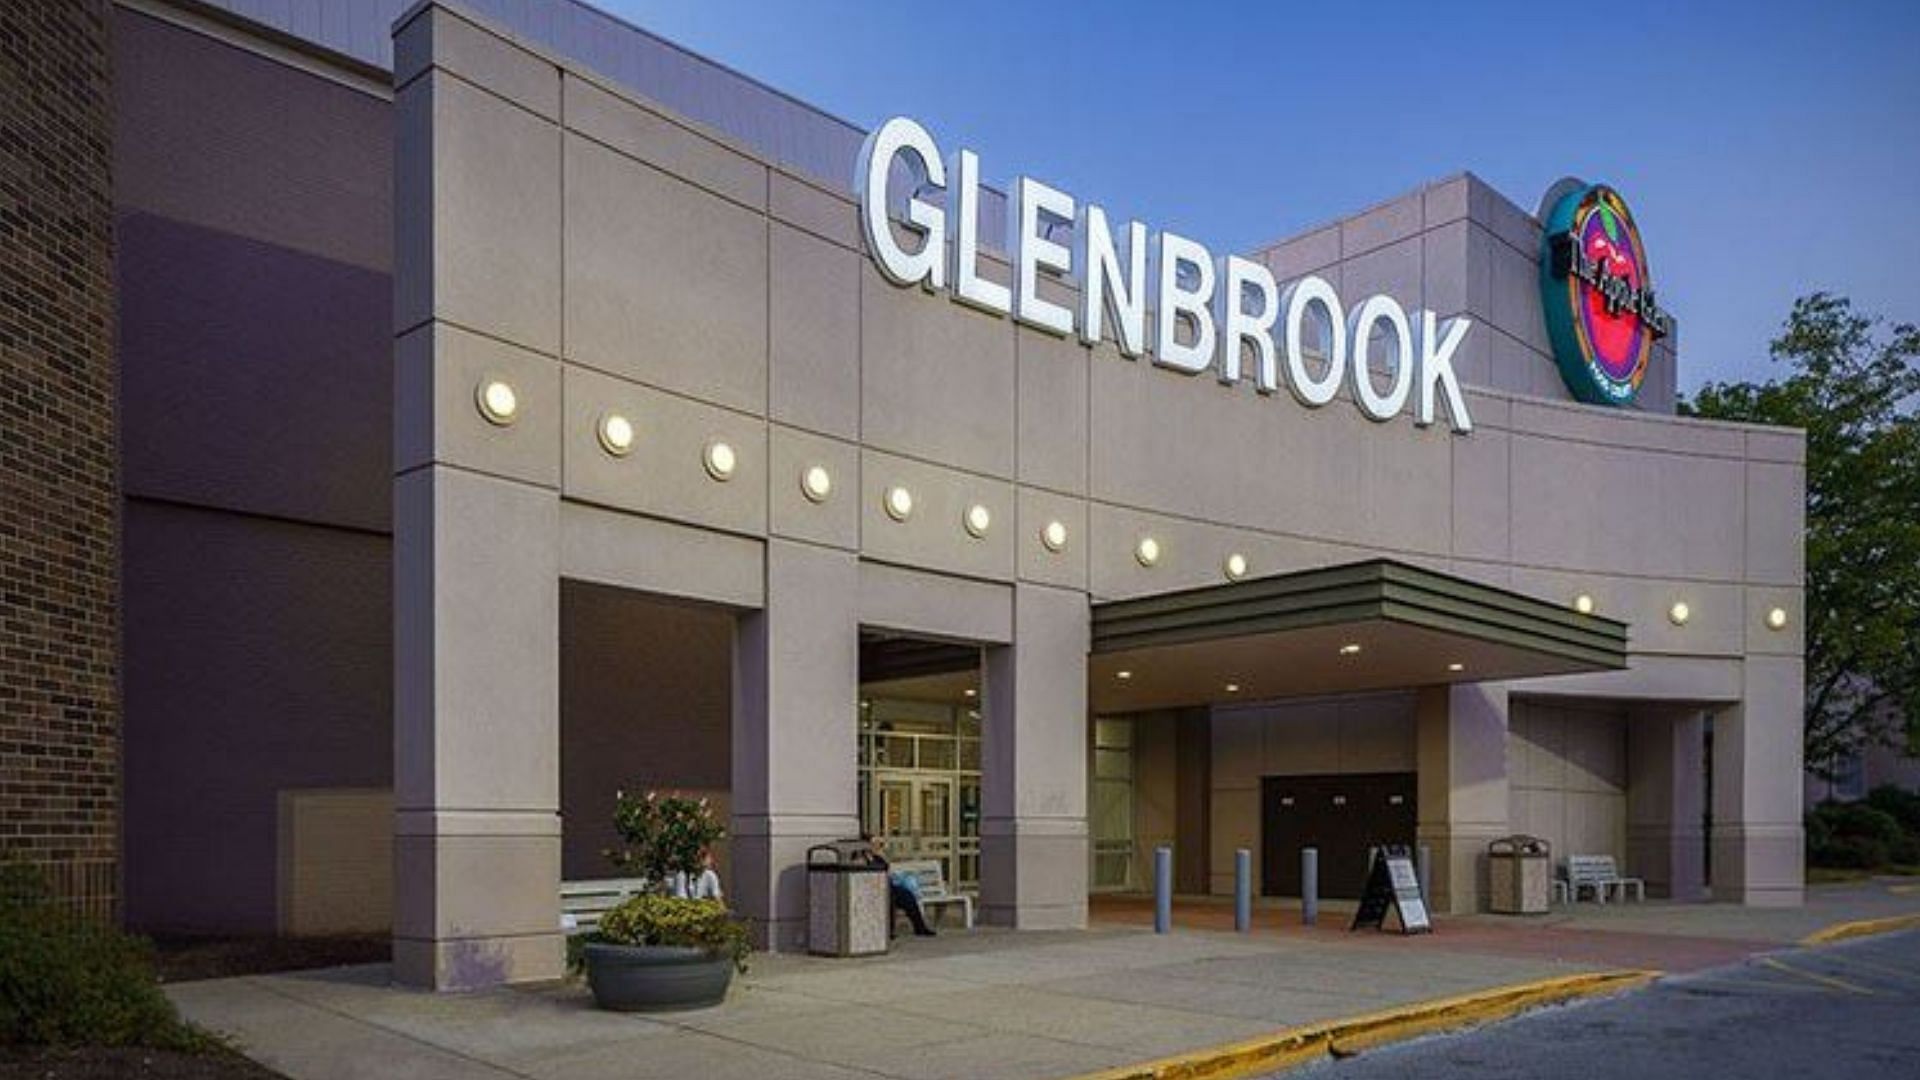 What happened at Glenbrook mall revealed as shooting leaves netizens alarmed (Image via Google Maps)